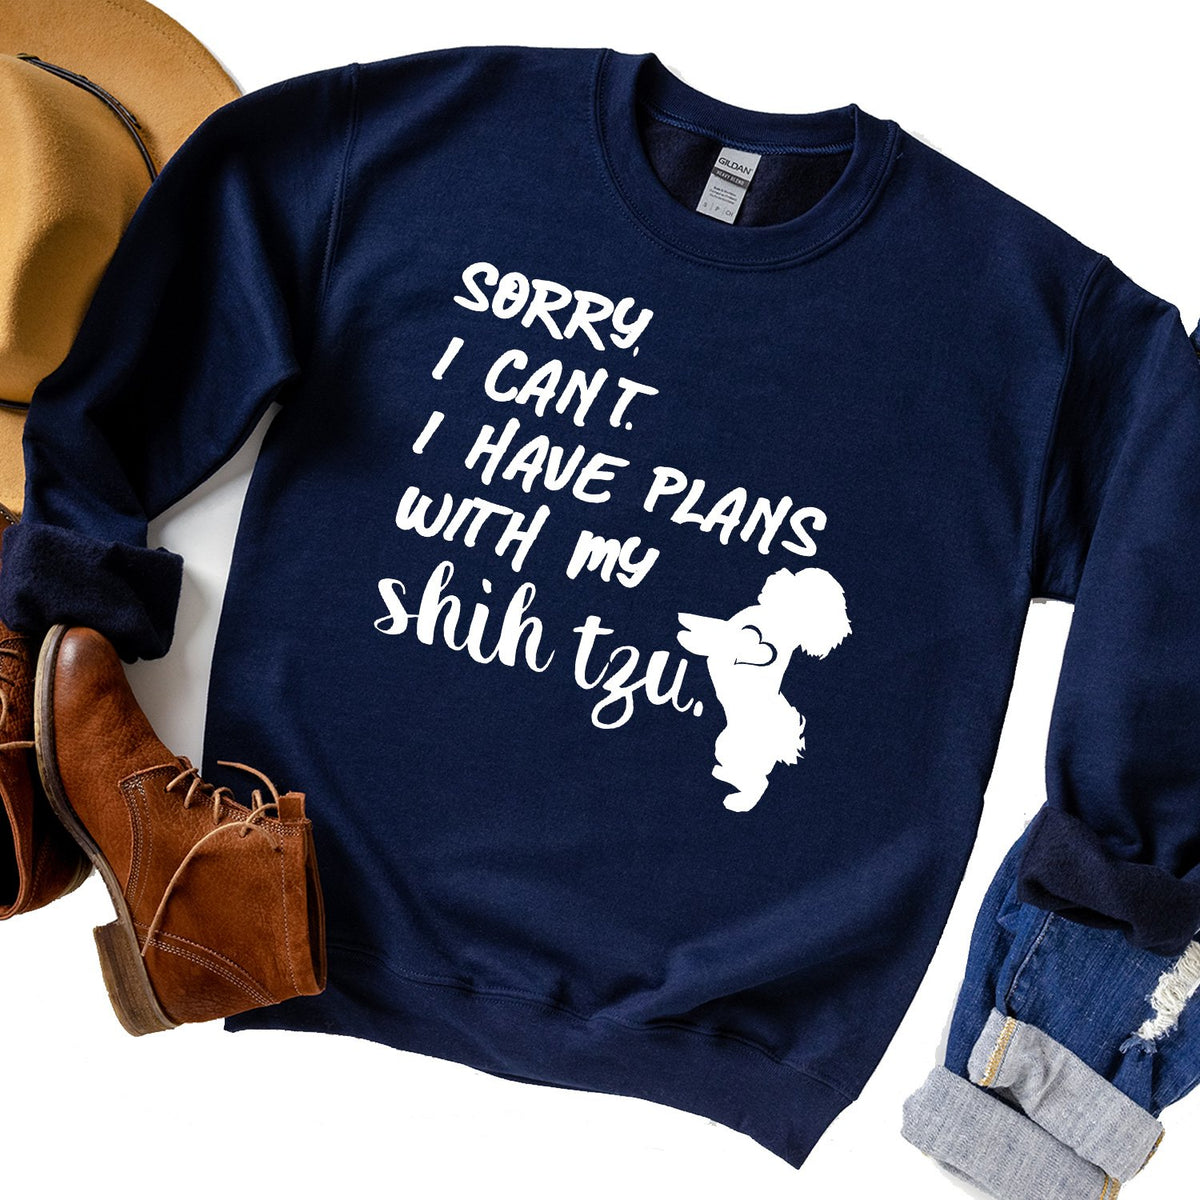 Sorry I Can&#39;t I Have Plans with My Shih Tzu - Long Sleeve Heavy Crewneck Sweatshirt